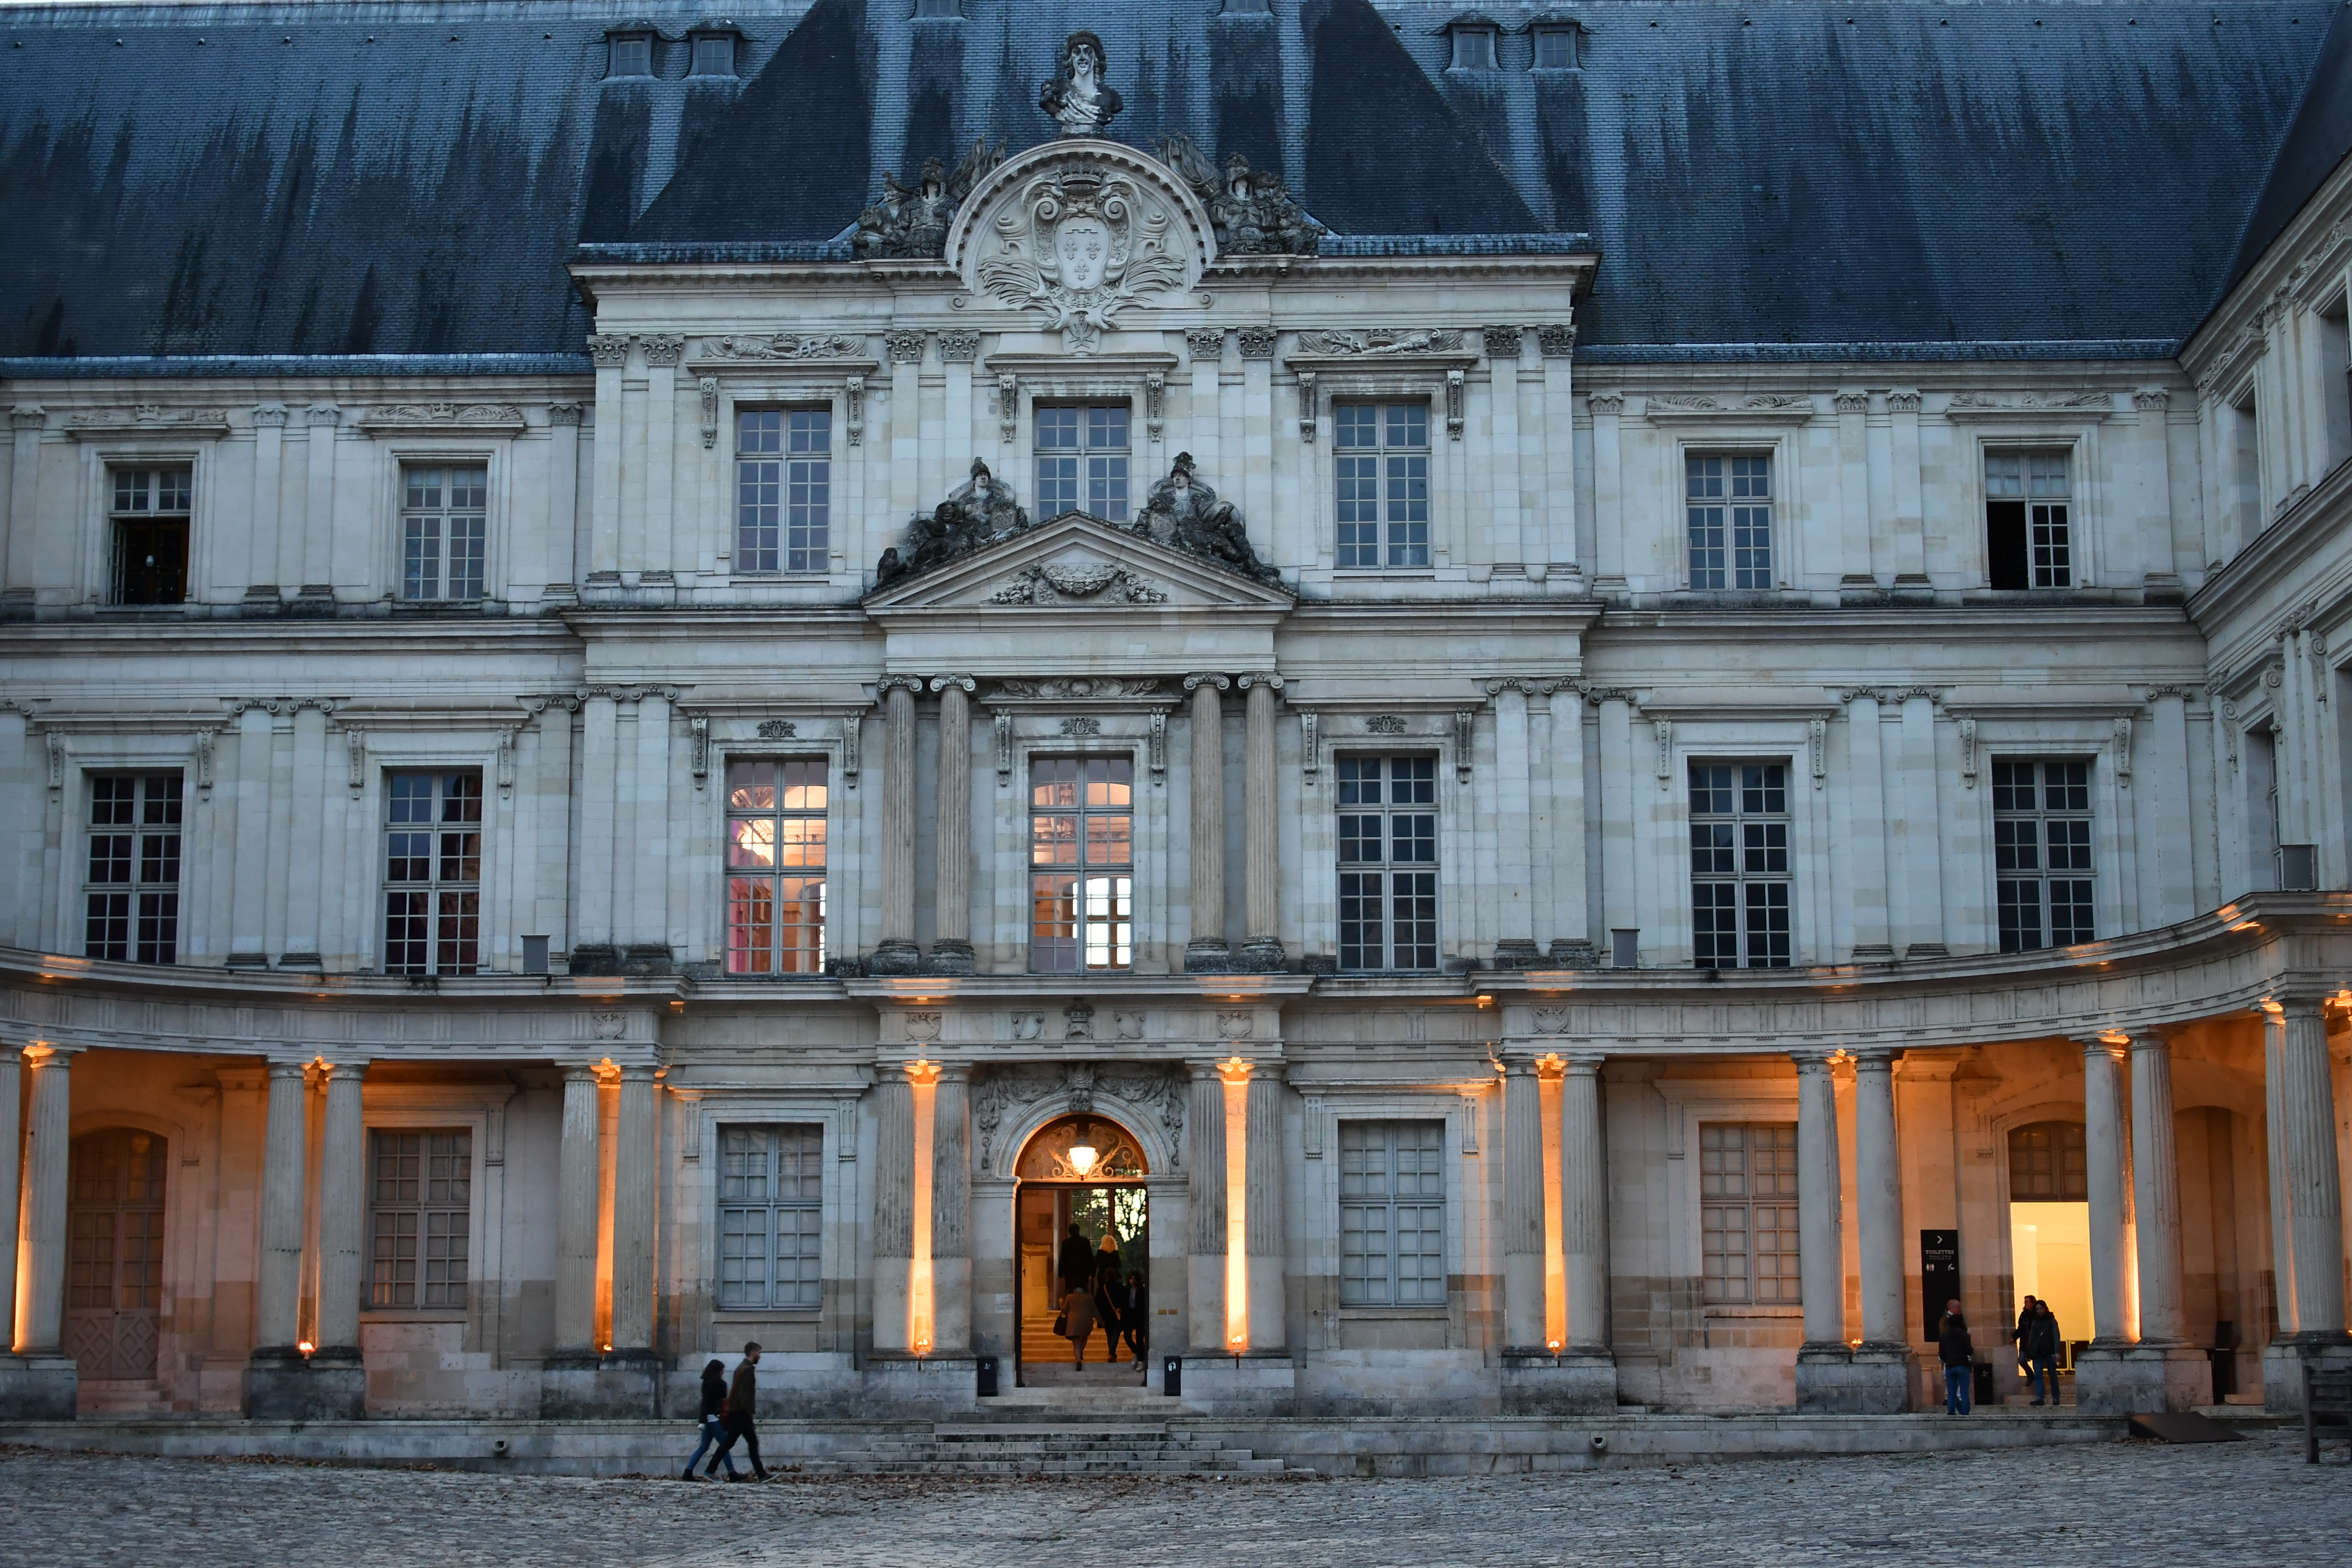 The entry of the royal castle of blois.